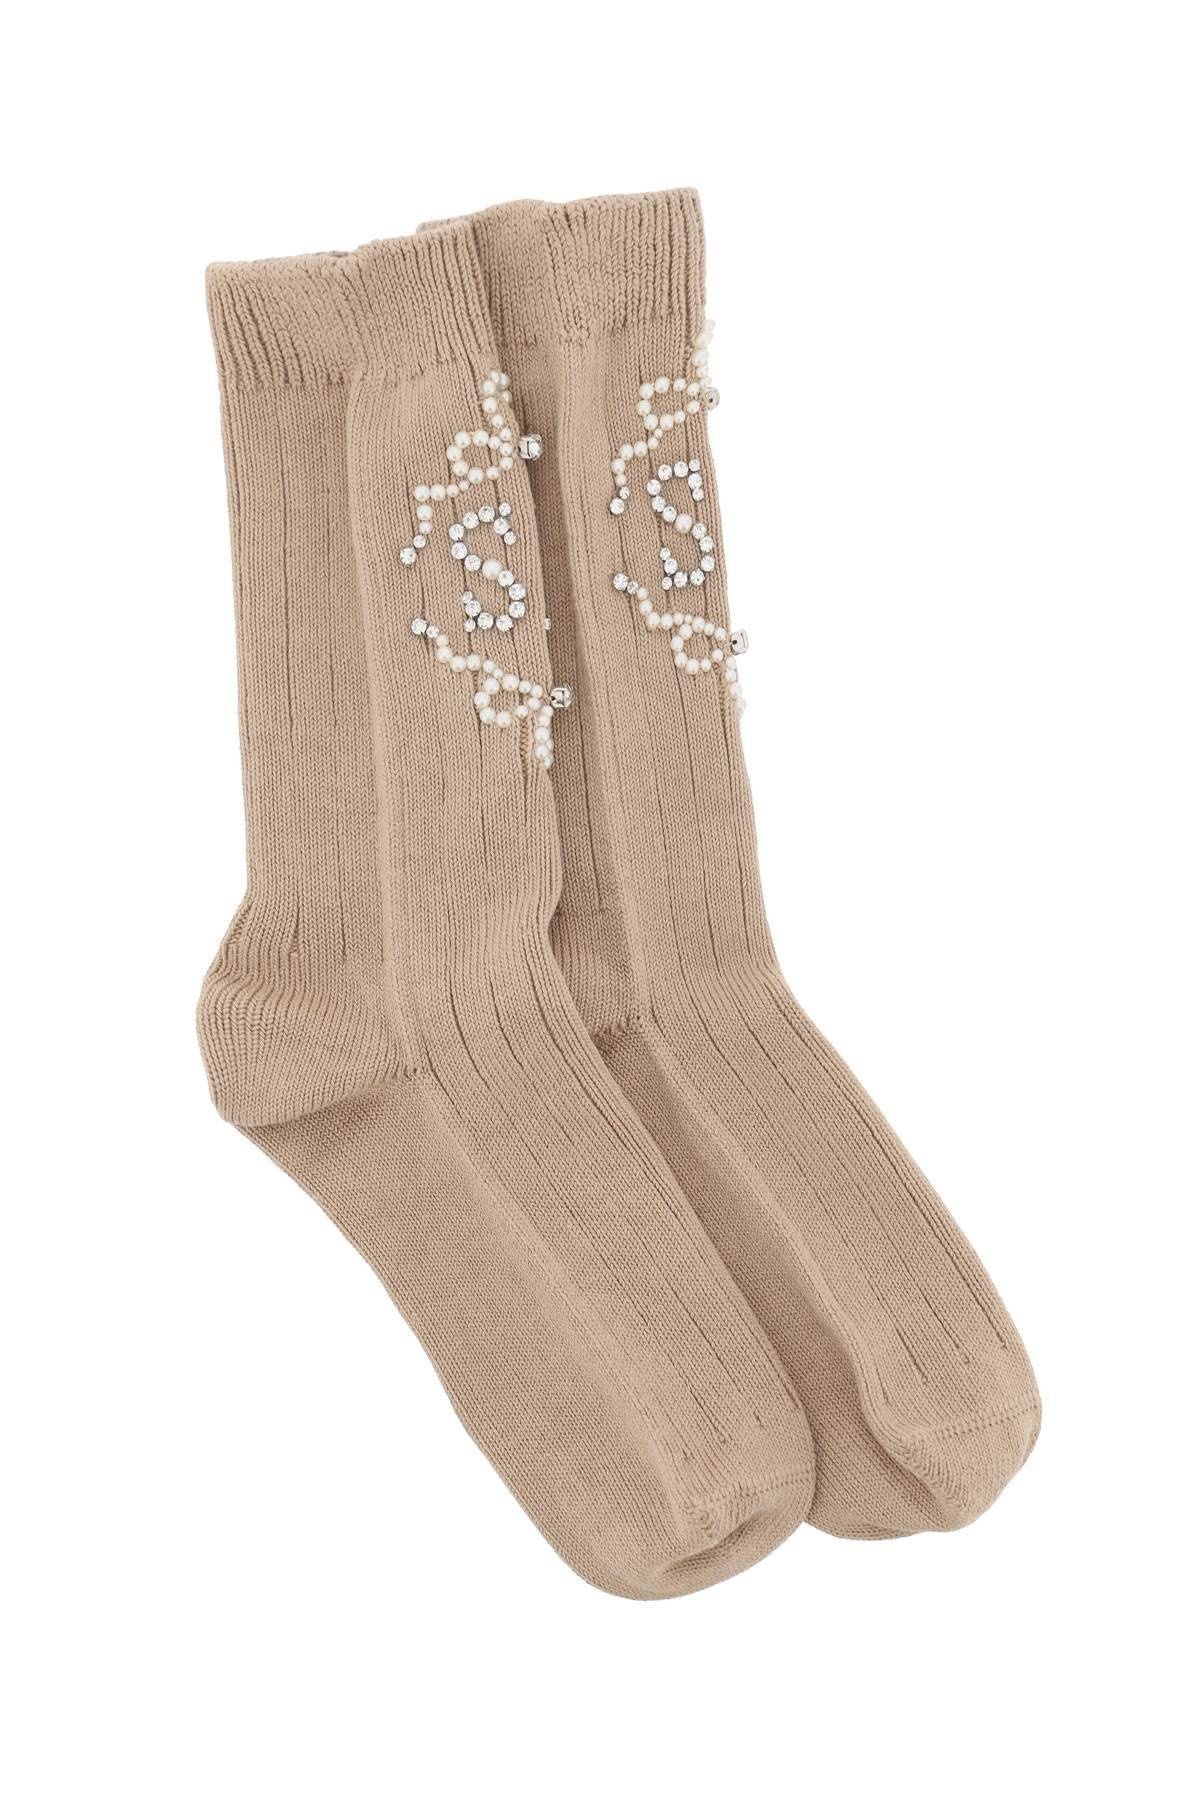 SR SOCKS WITH PEARLS AND CRYSTALS - 1